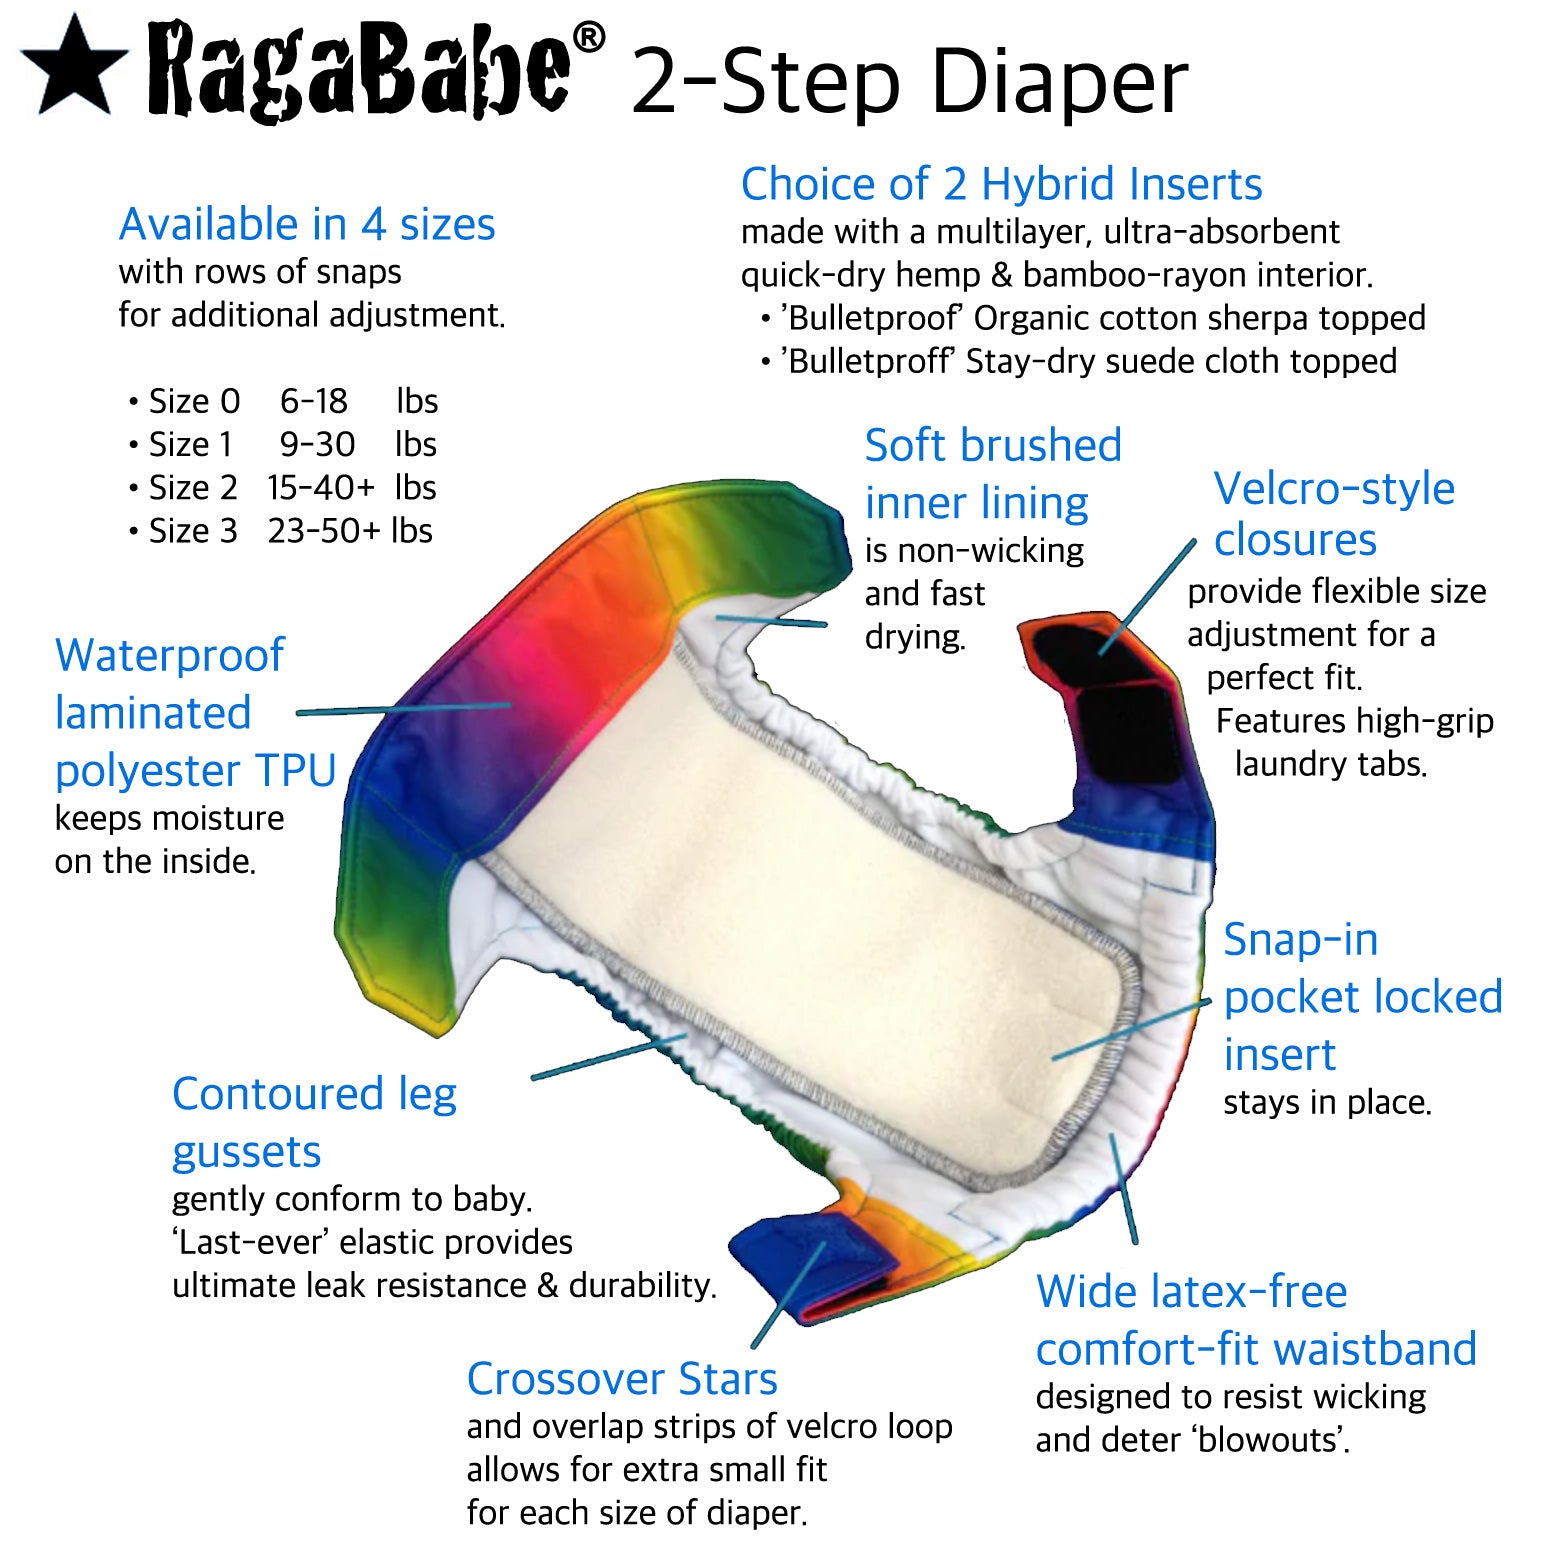 What Is Inside Those Disposable Diapers? - GearLab